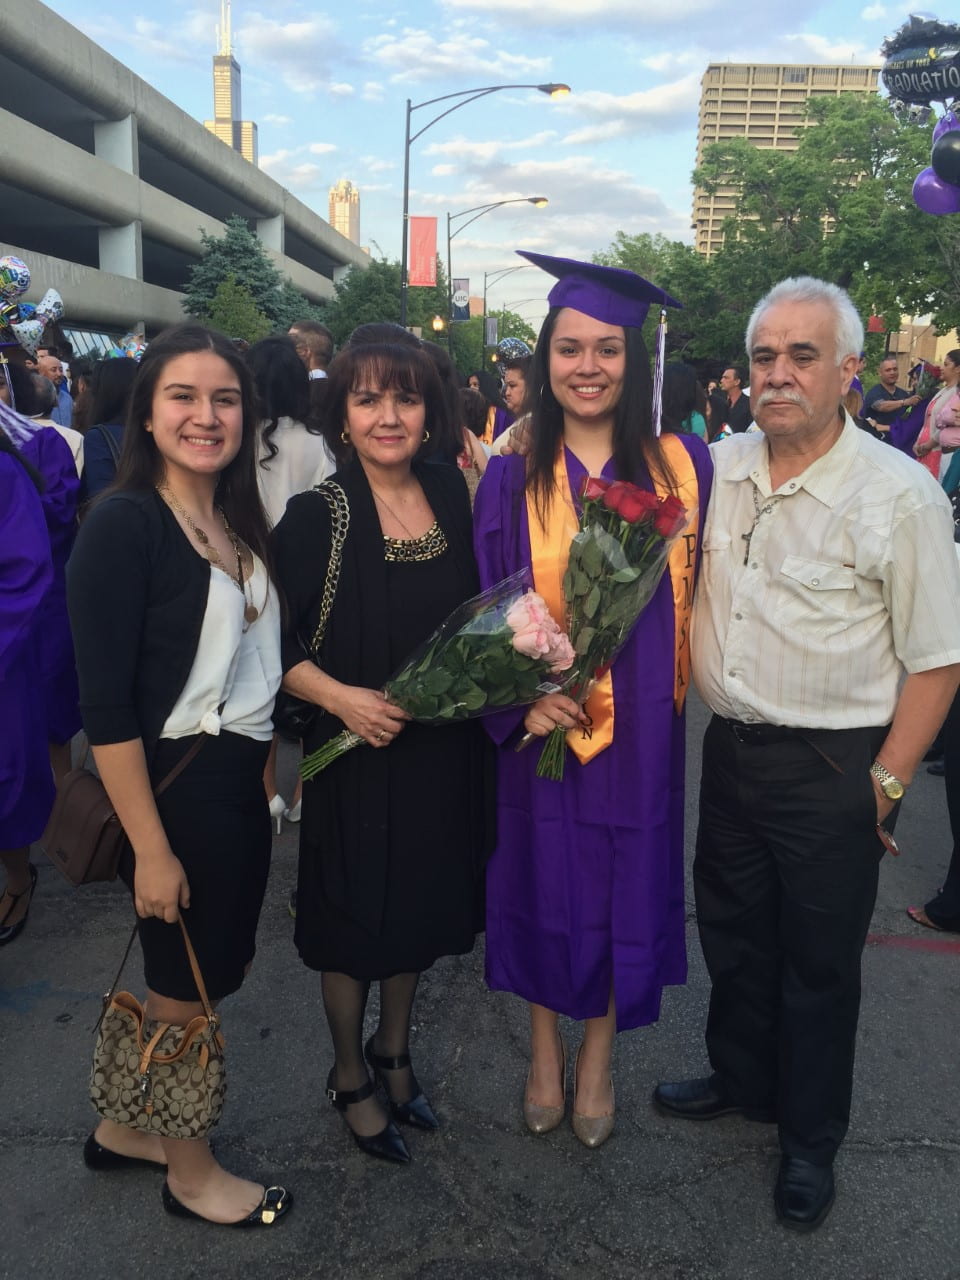 Nataly Martinez and her family